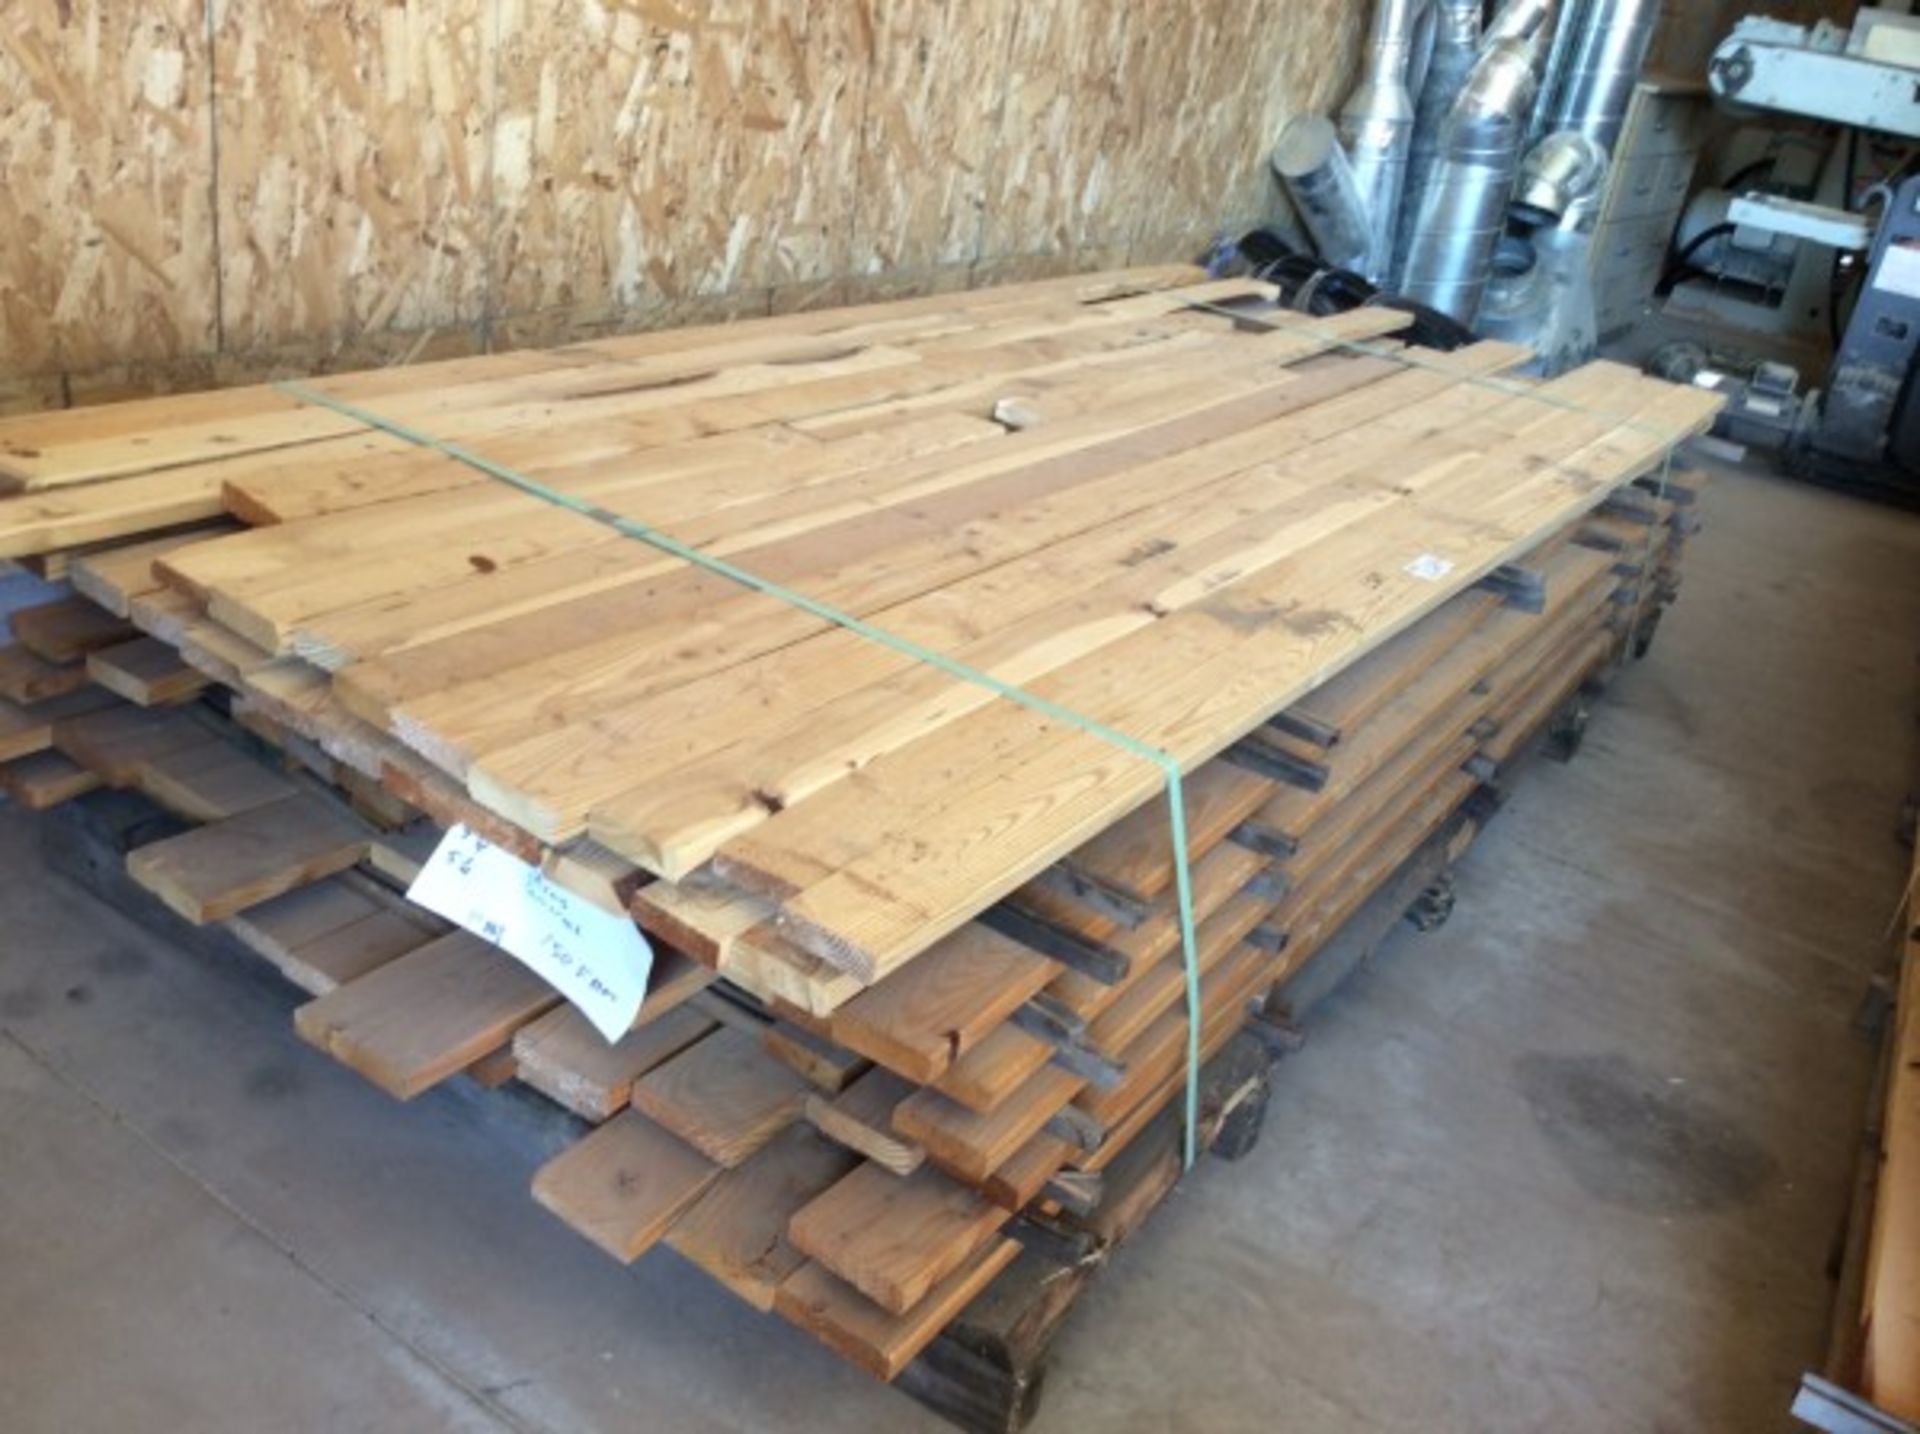 SOFTWOOD DECKING LUMBER - APPROX 100 PCS - C - Image 2 of 2